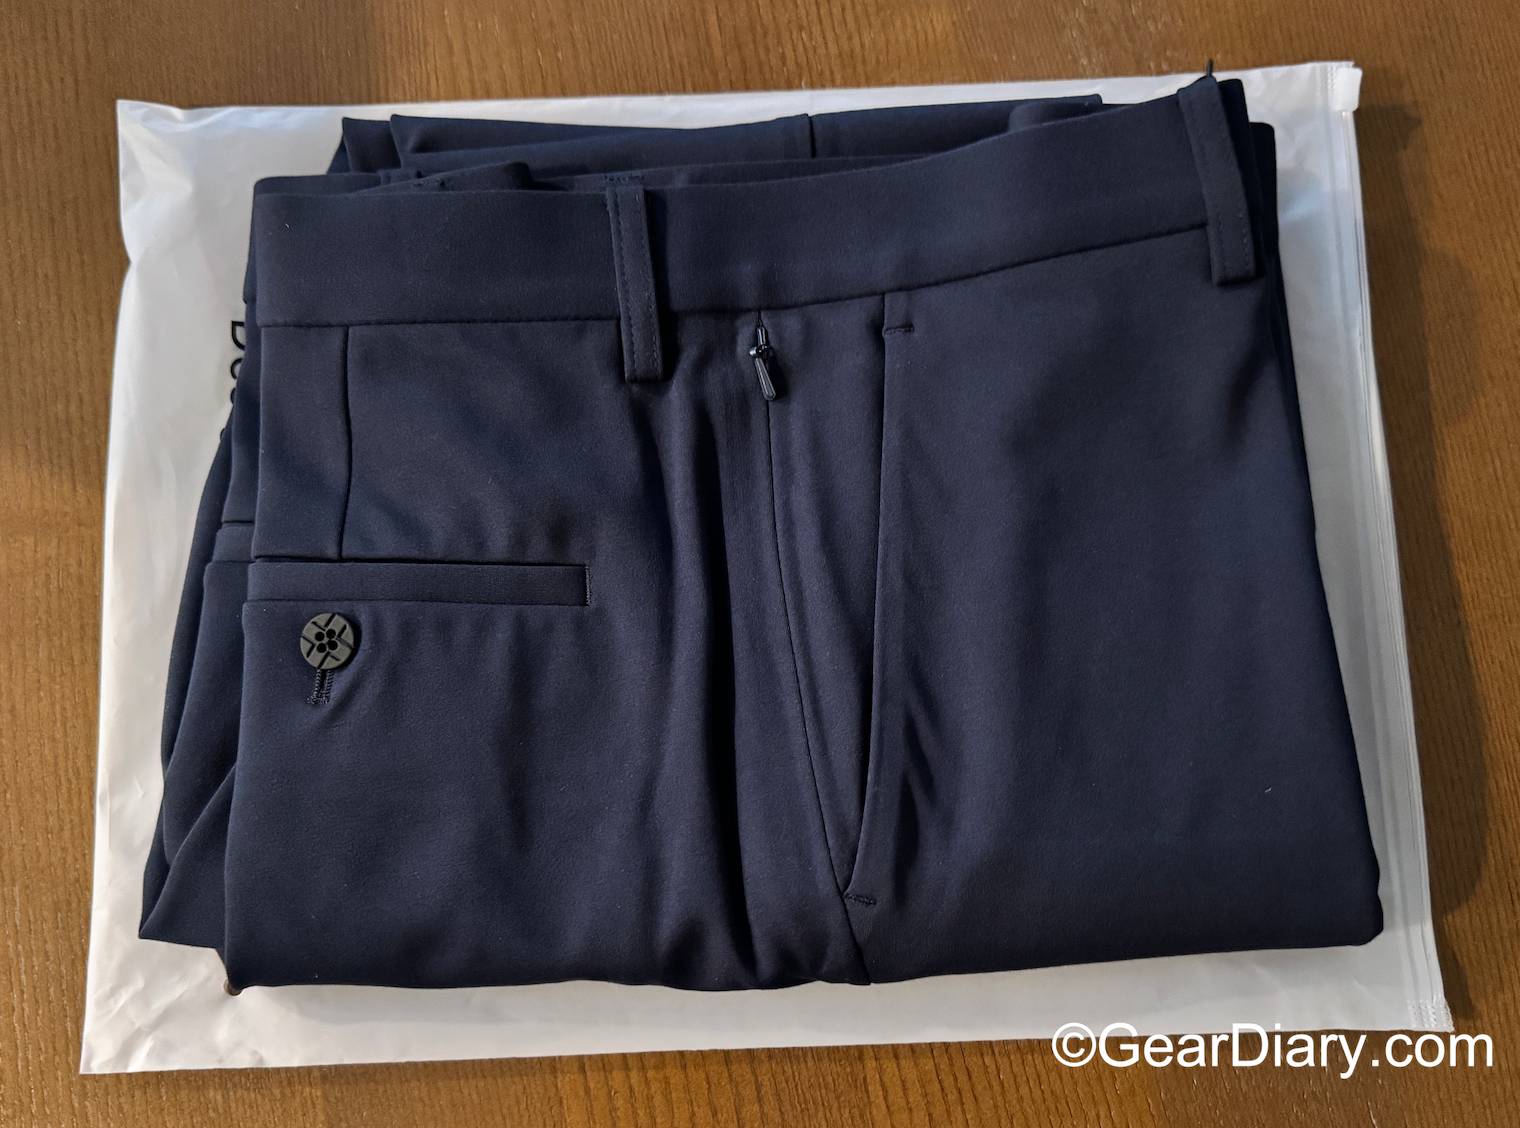 xSuit 4.0 Review: Ready for Travel and Also Perfect for Daily Wear